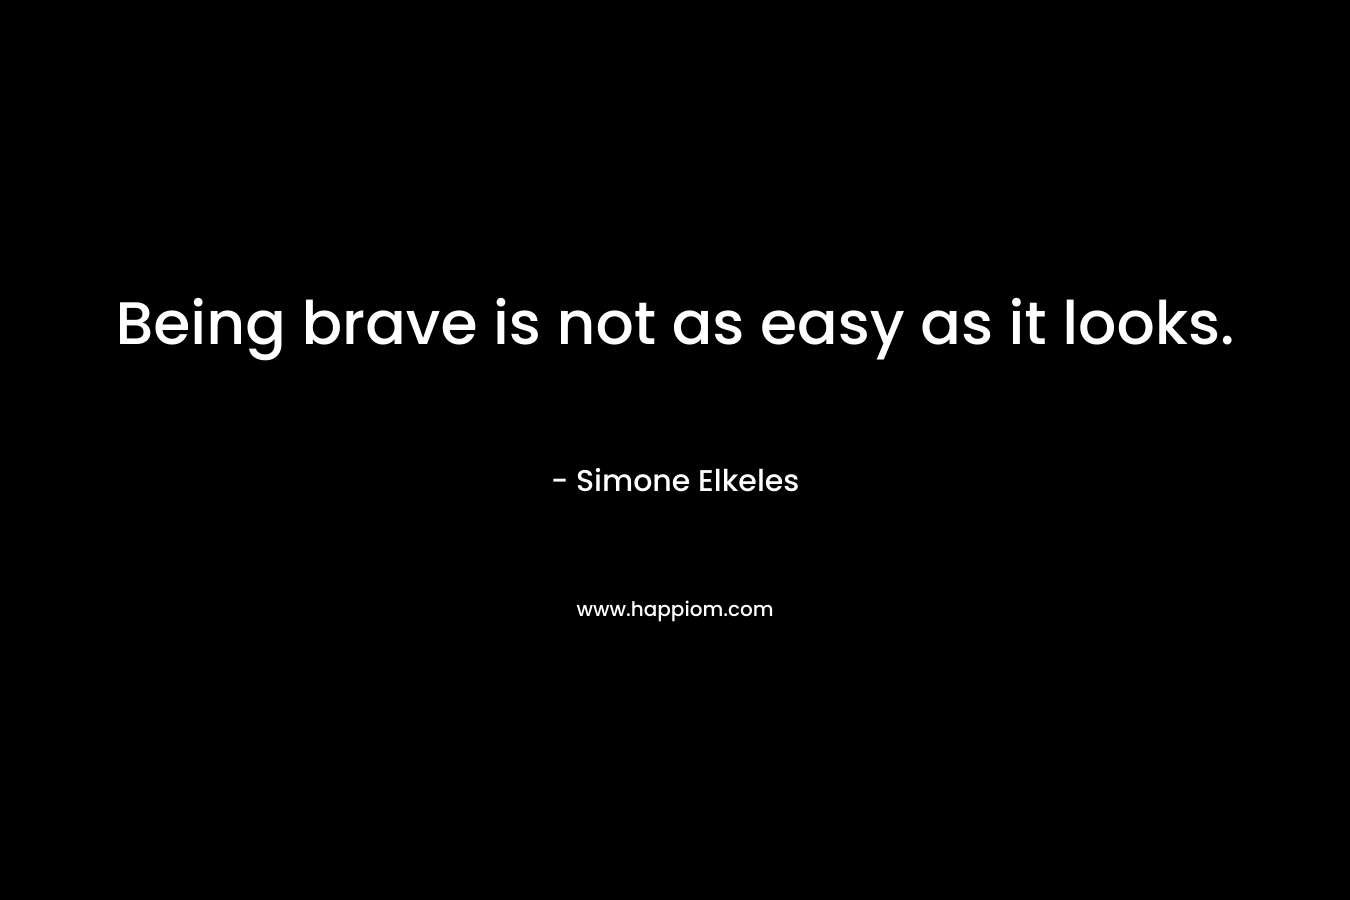 Being brave is not as easy as it looks. – Simone Elkeles